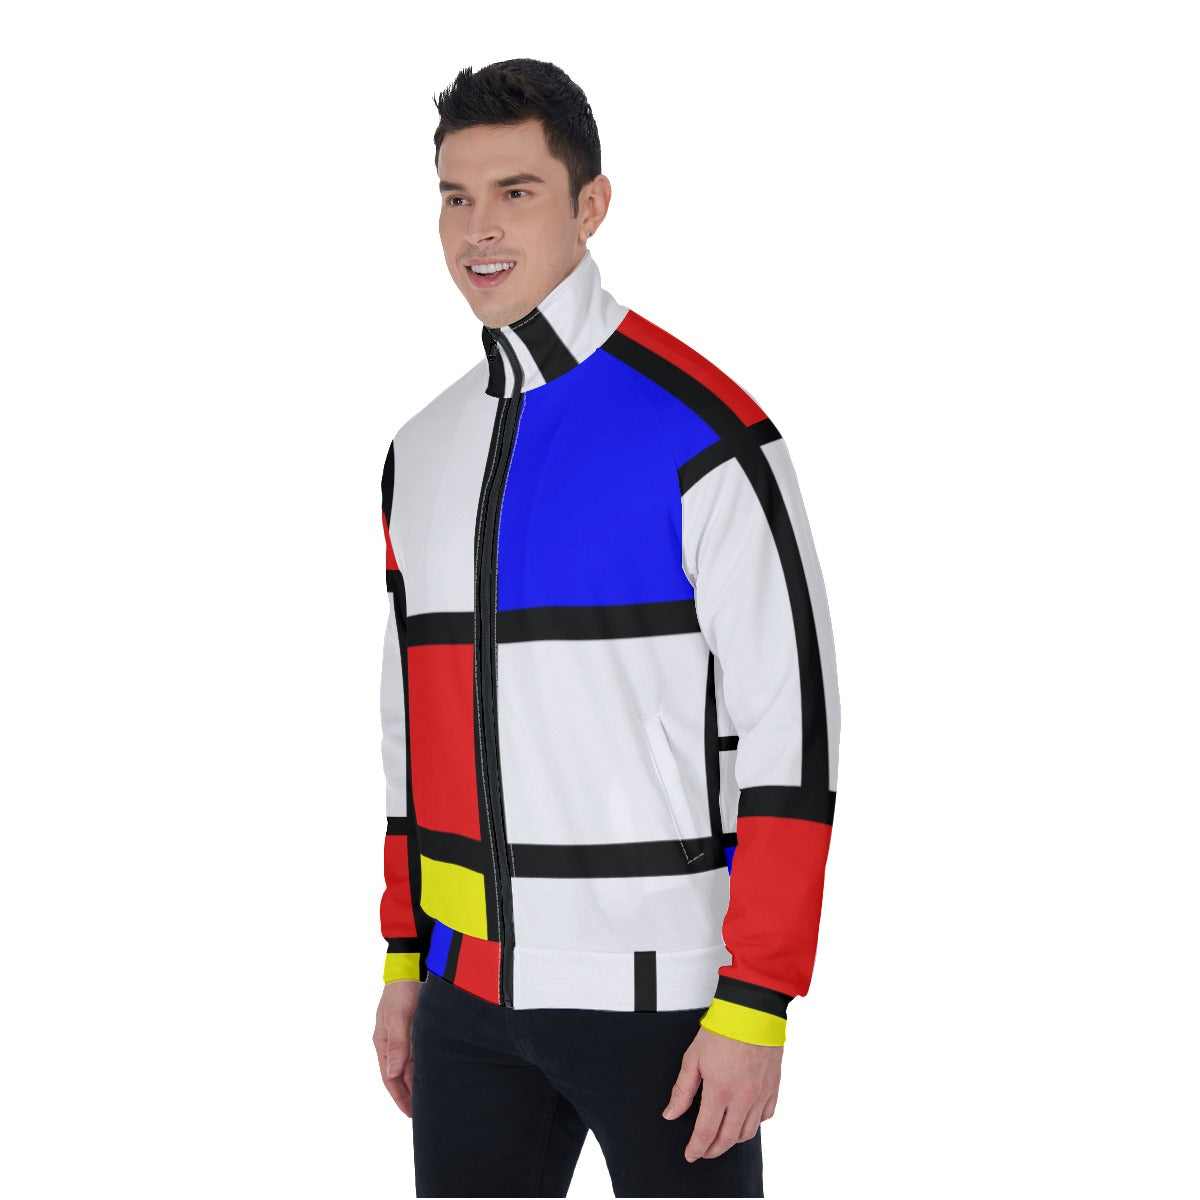 All-Over Print Men's Stand Collar Jacket with Mondrian design (shipping from China)